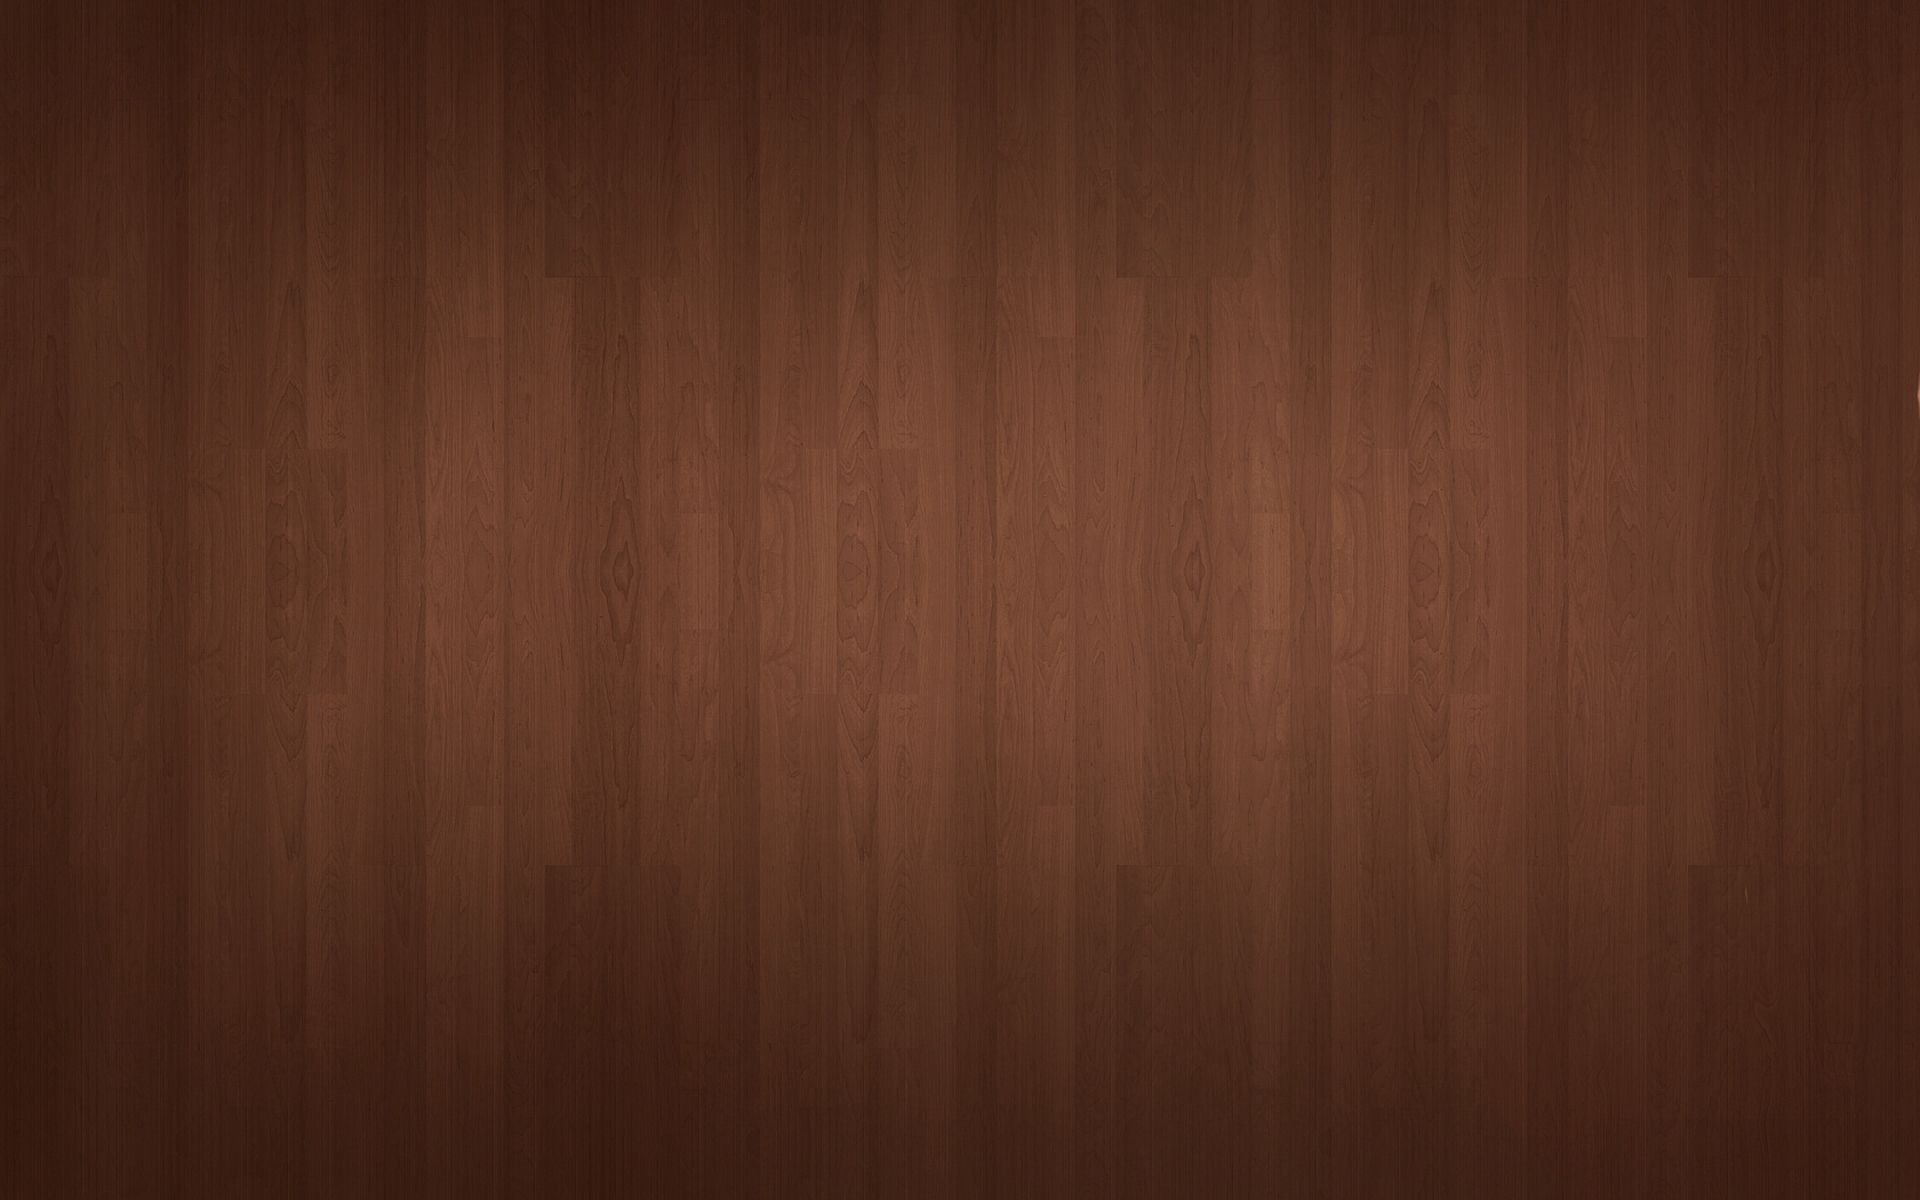 textures, wooden, texture, planks, board, background, wood